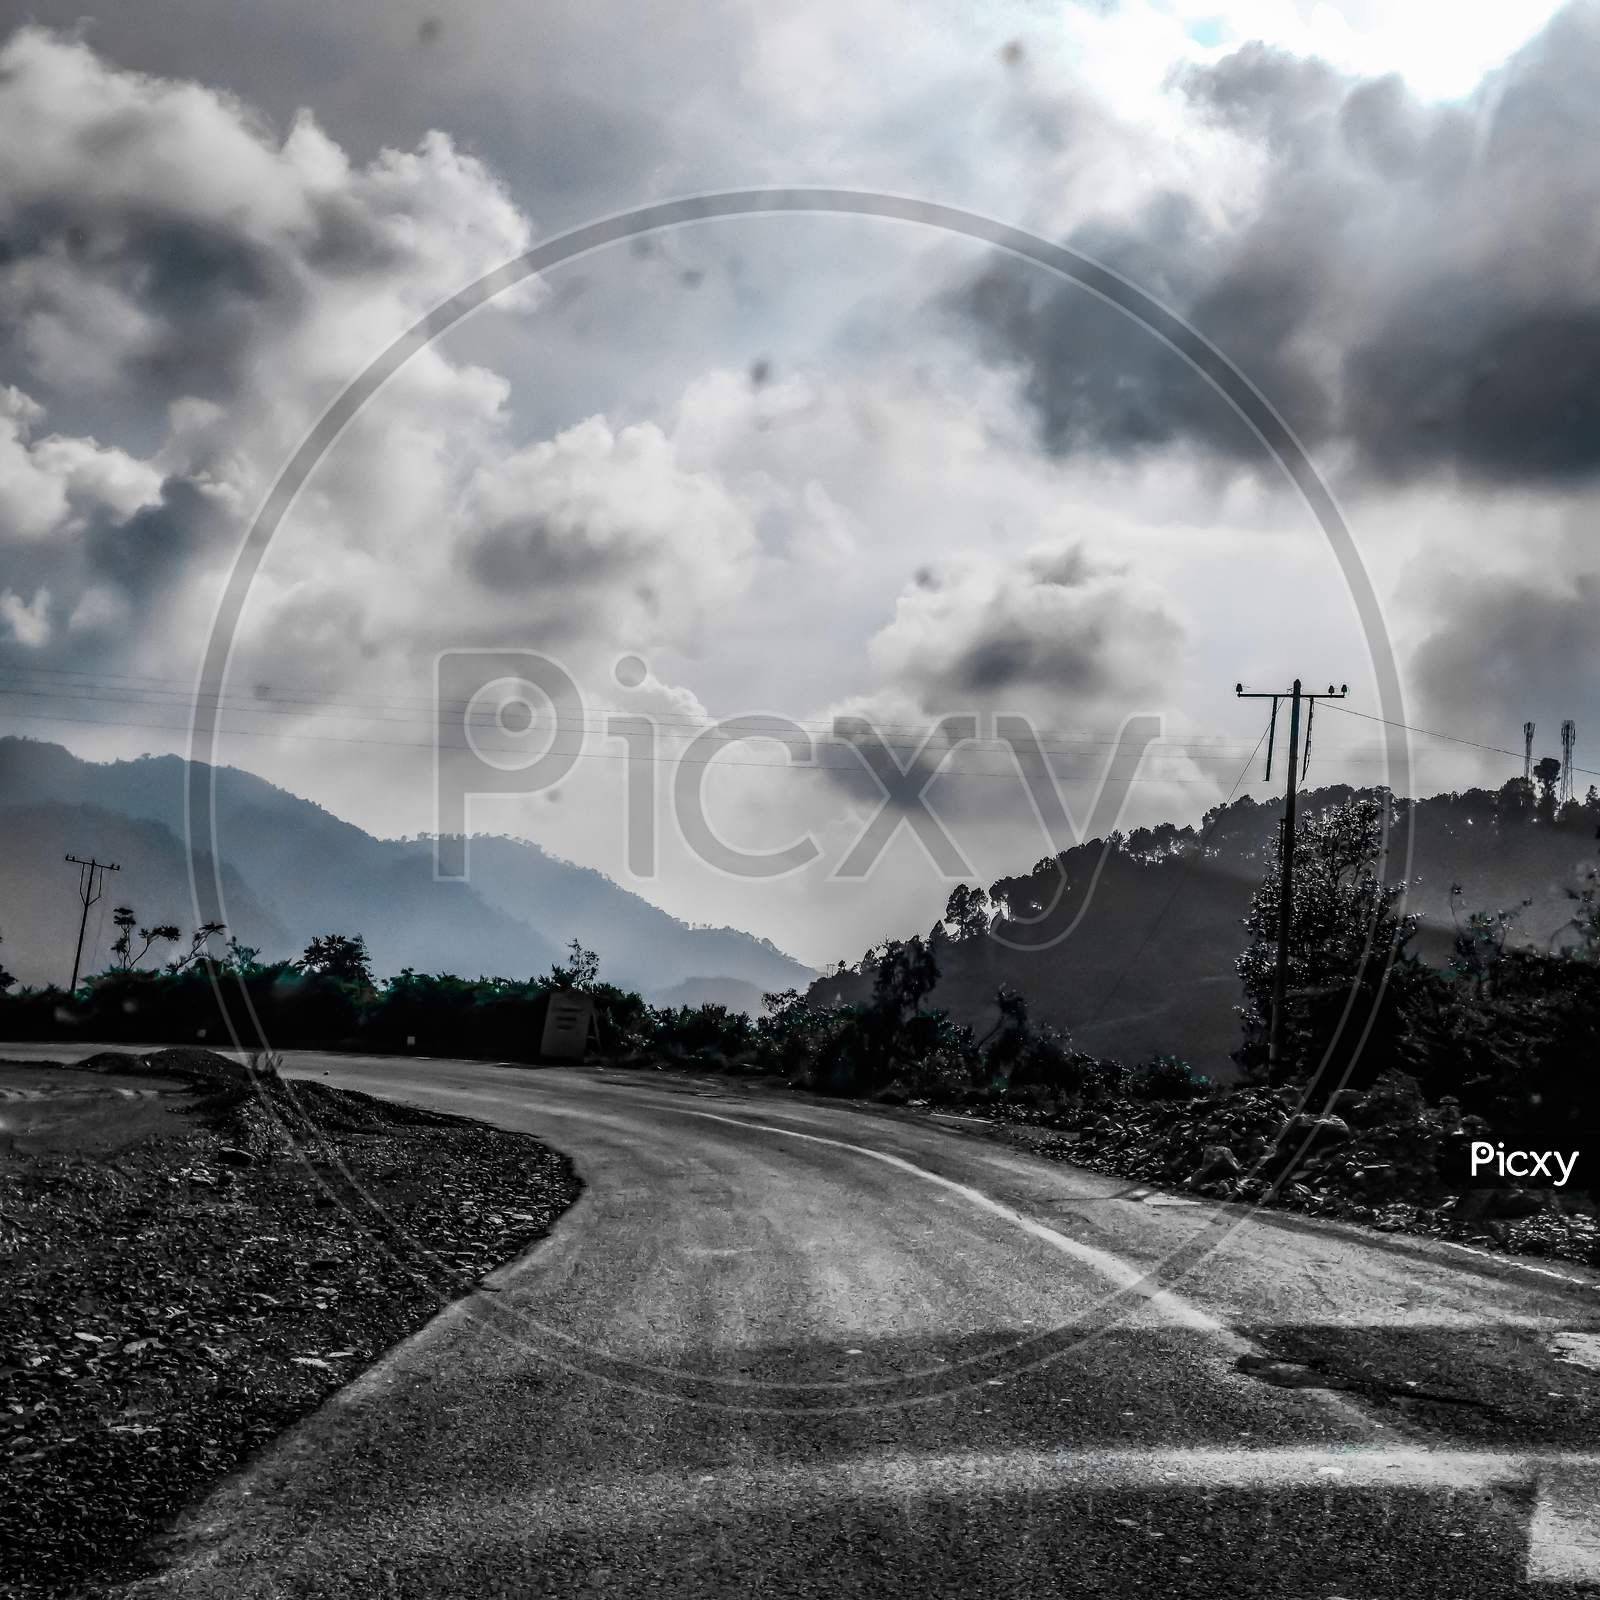 A monochrome picture of an empty road taking turn with thick clouds in the sky